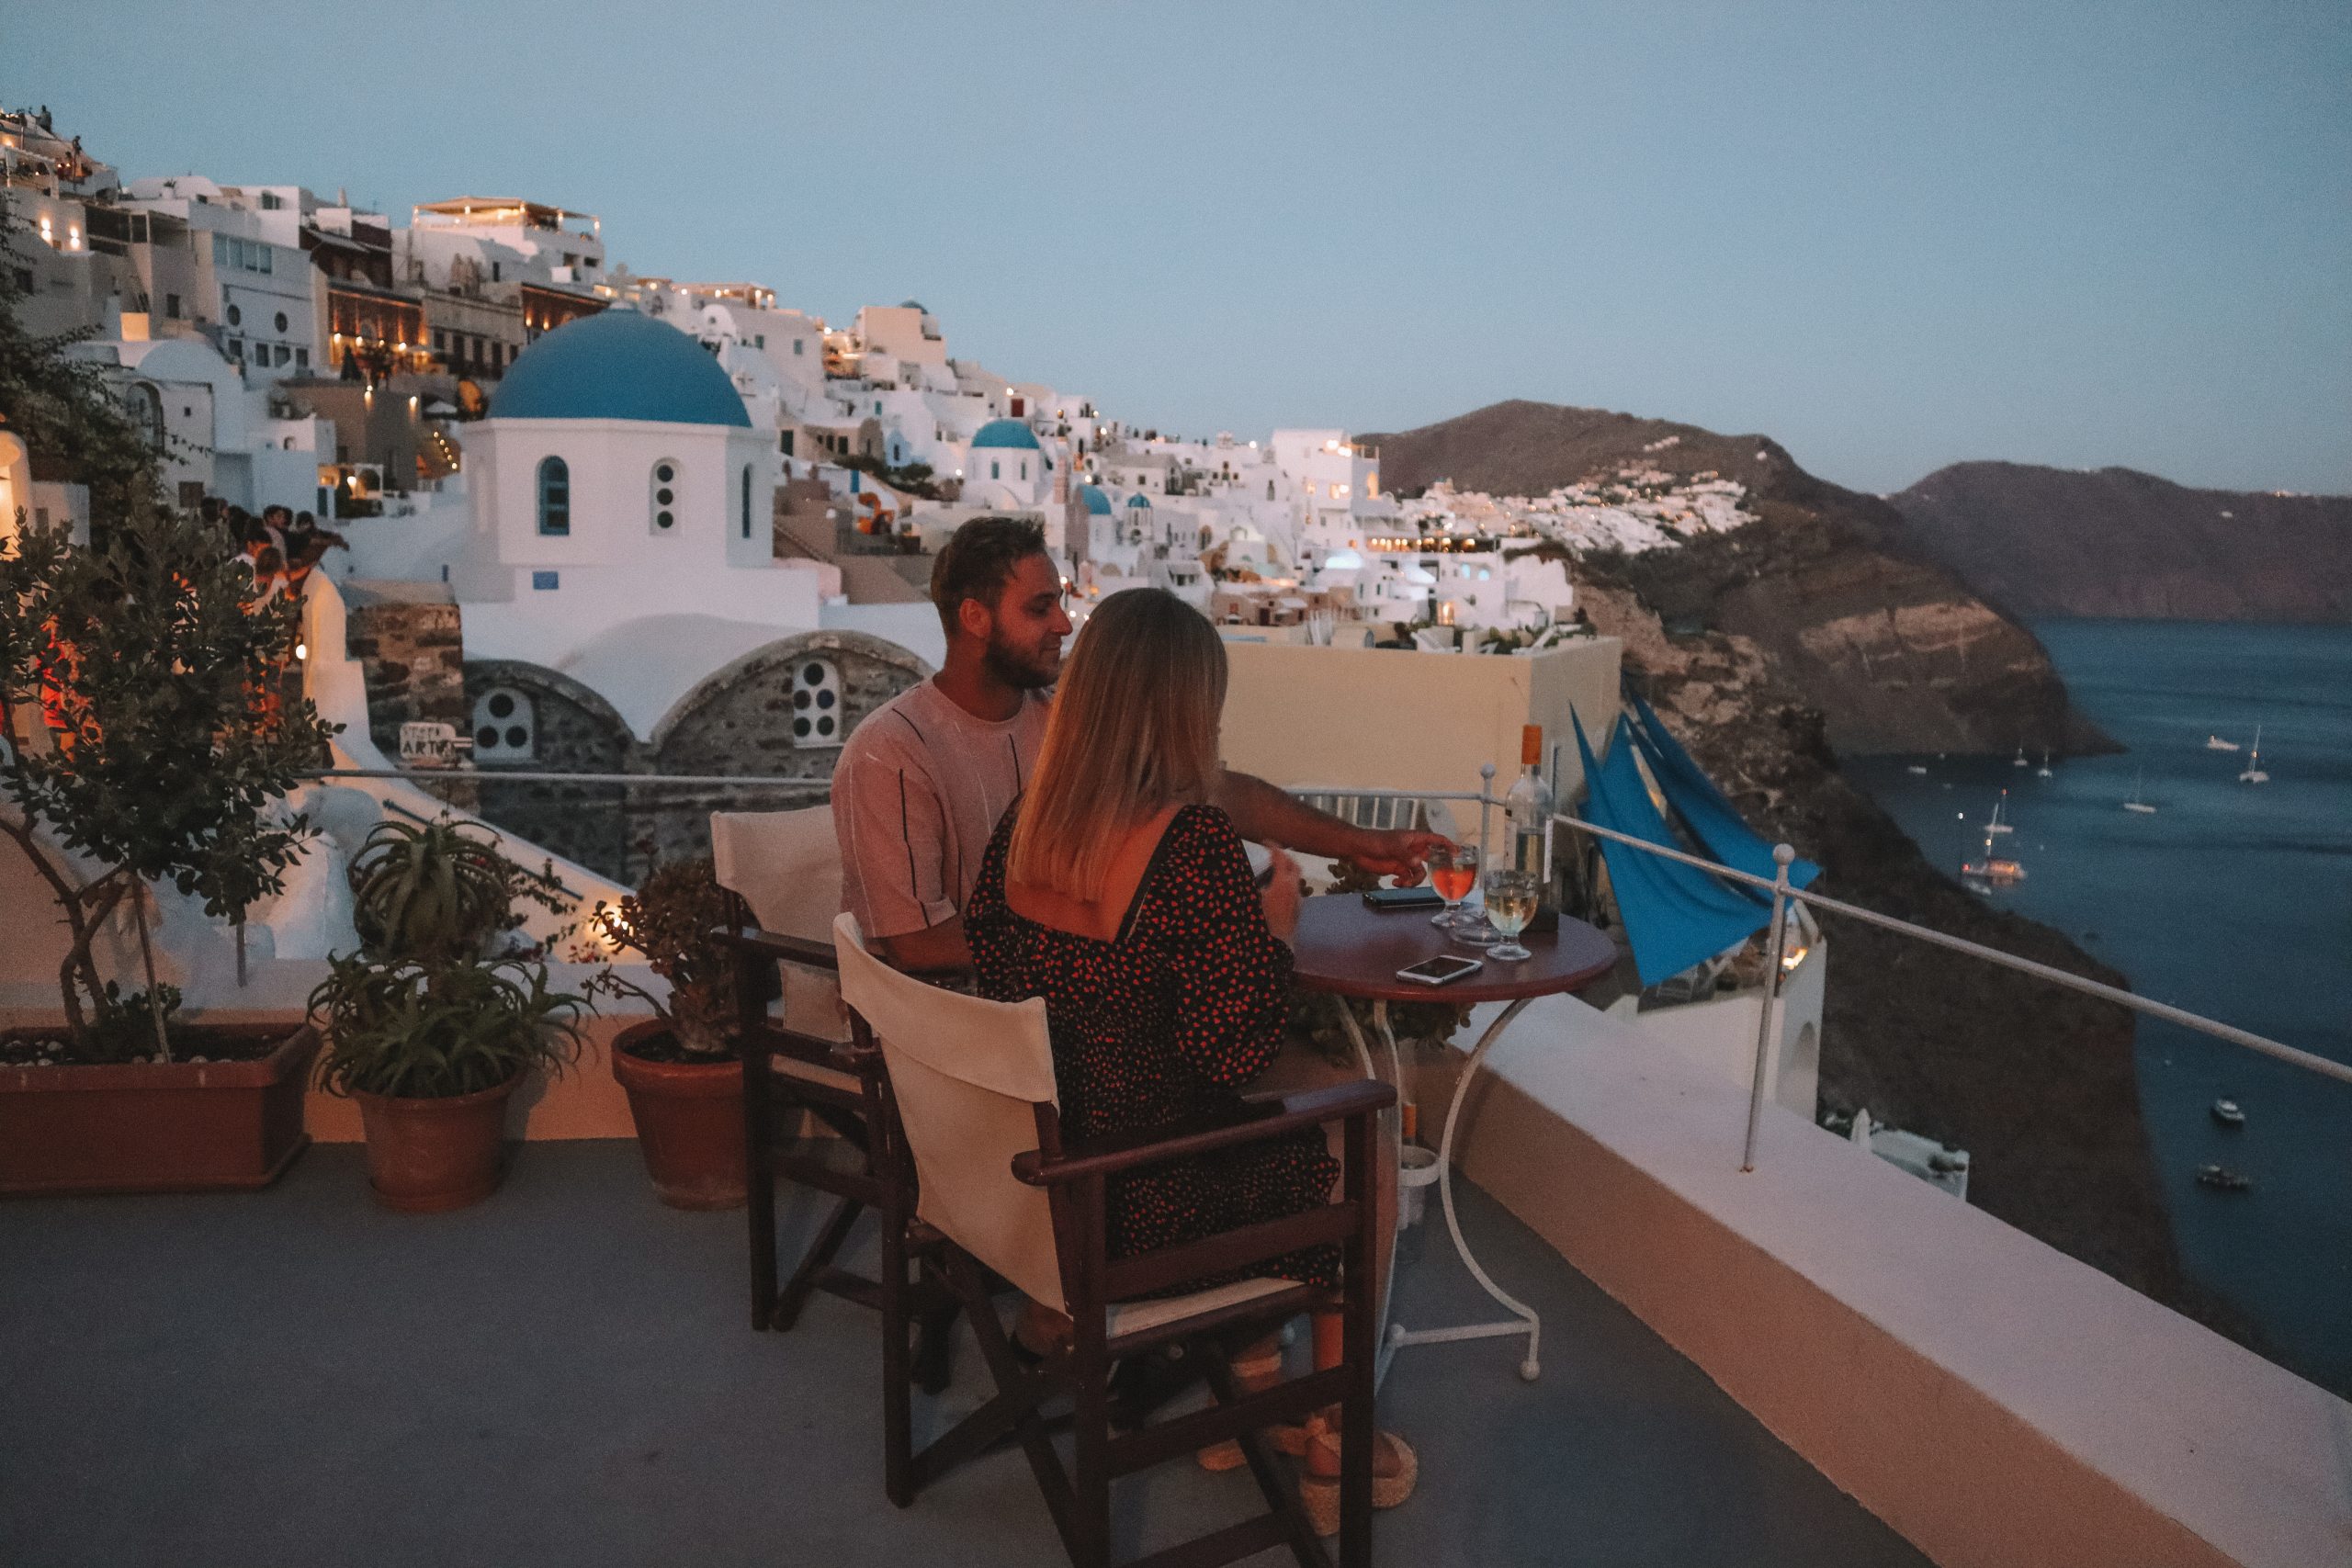 A couple drinking wine on their balcony in the evening with blue domed buildings in the background in Oia